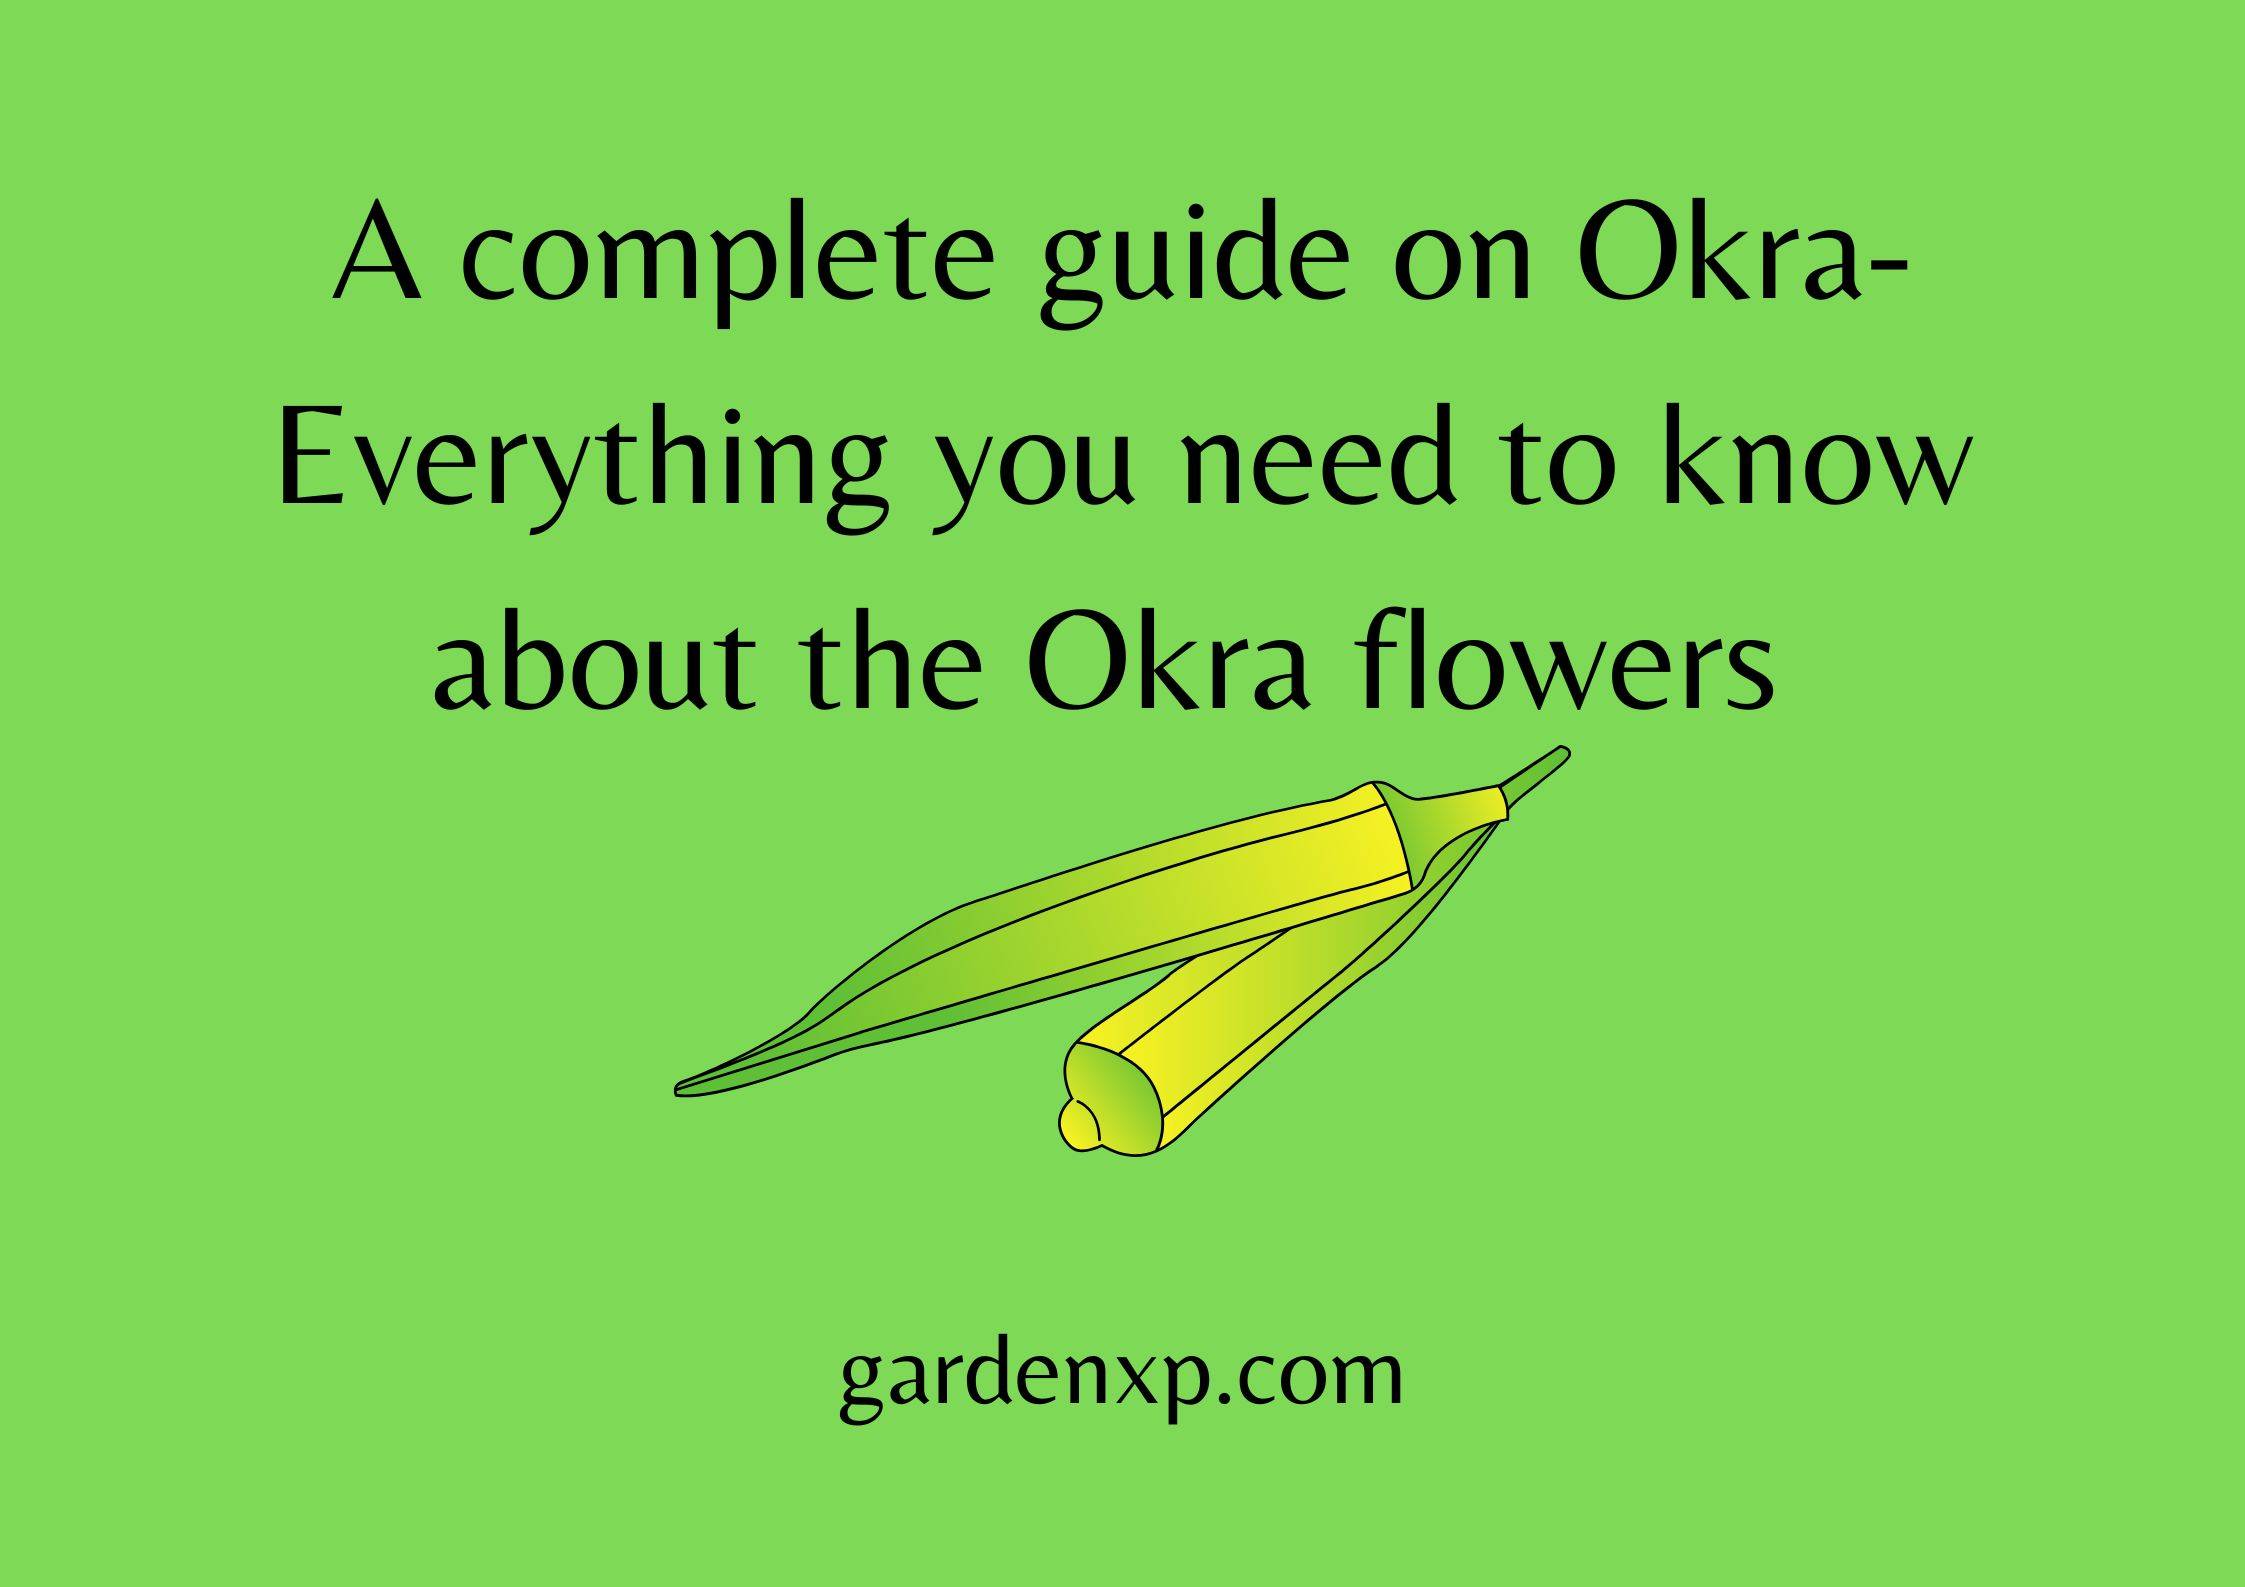 A complete guide on Okra- Everything you need to know about the Okra flowers 